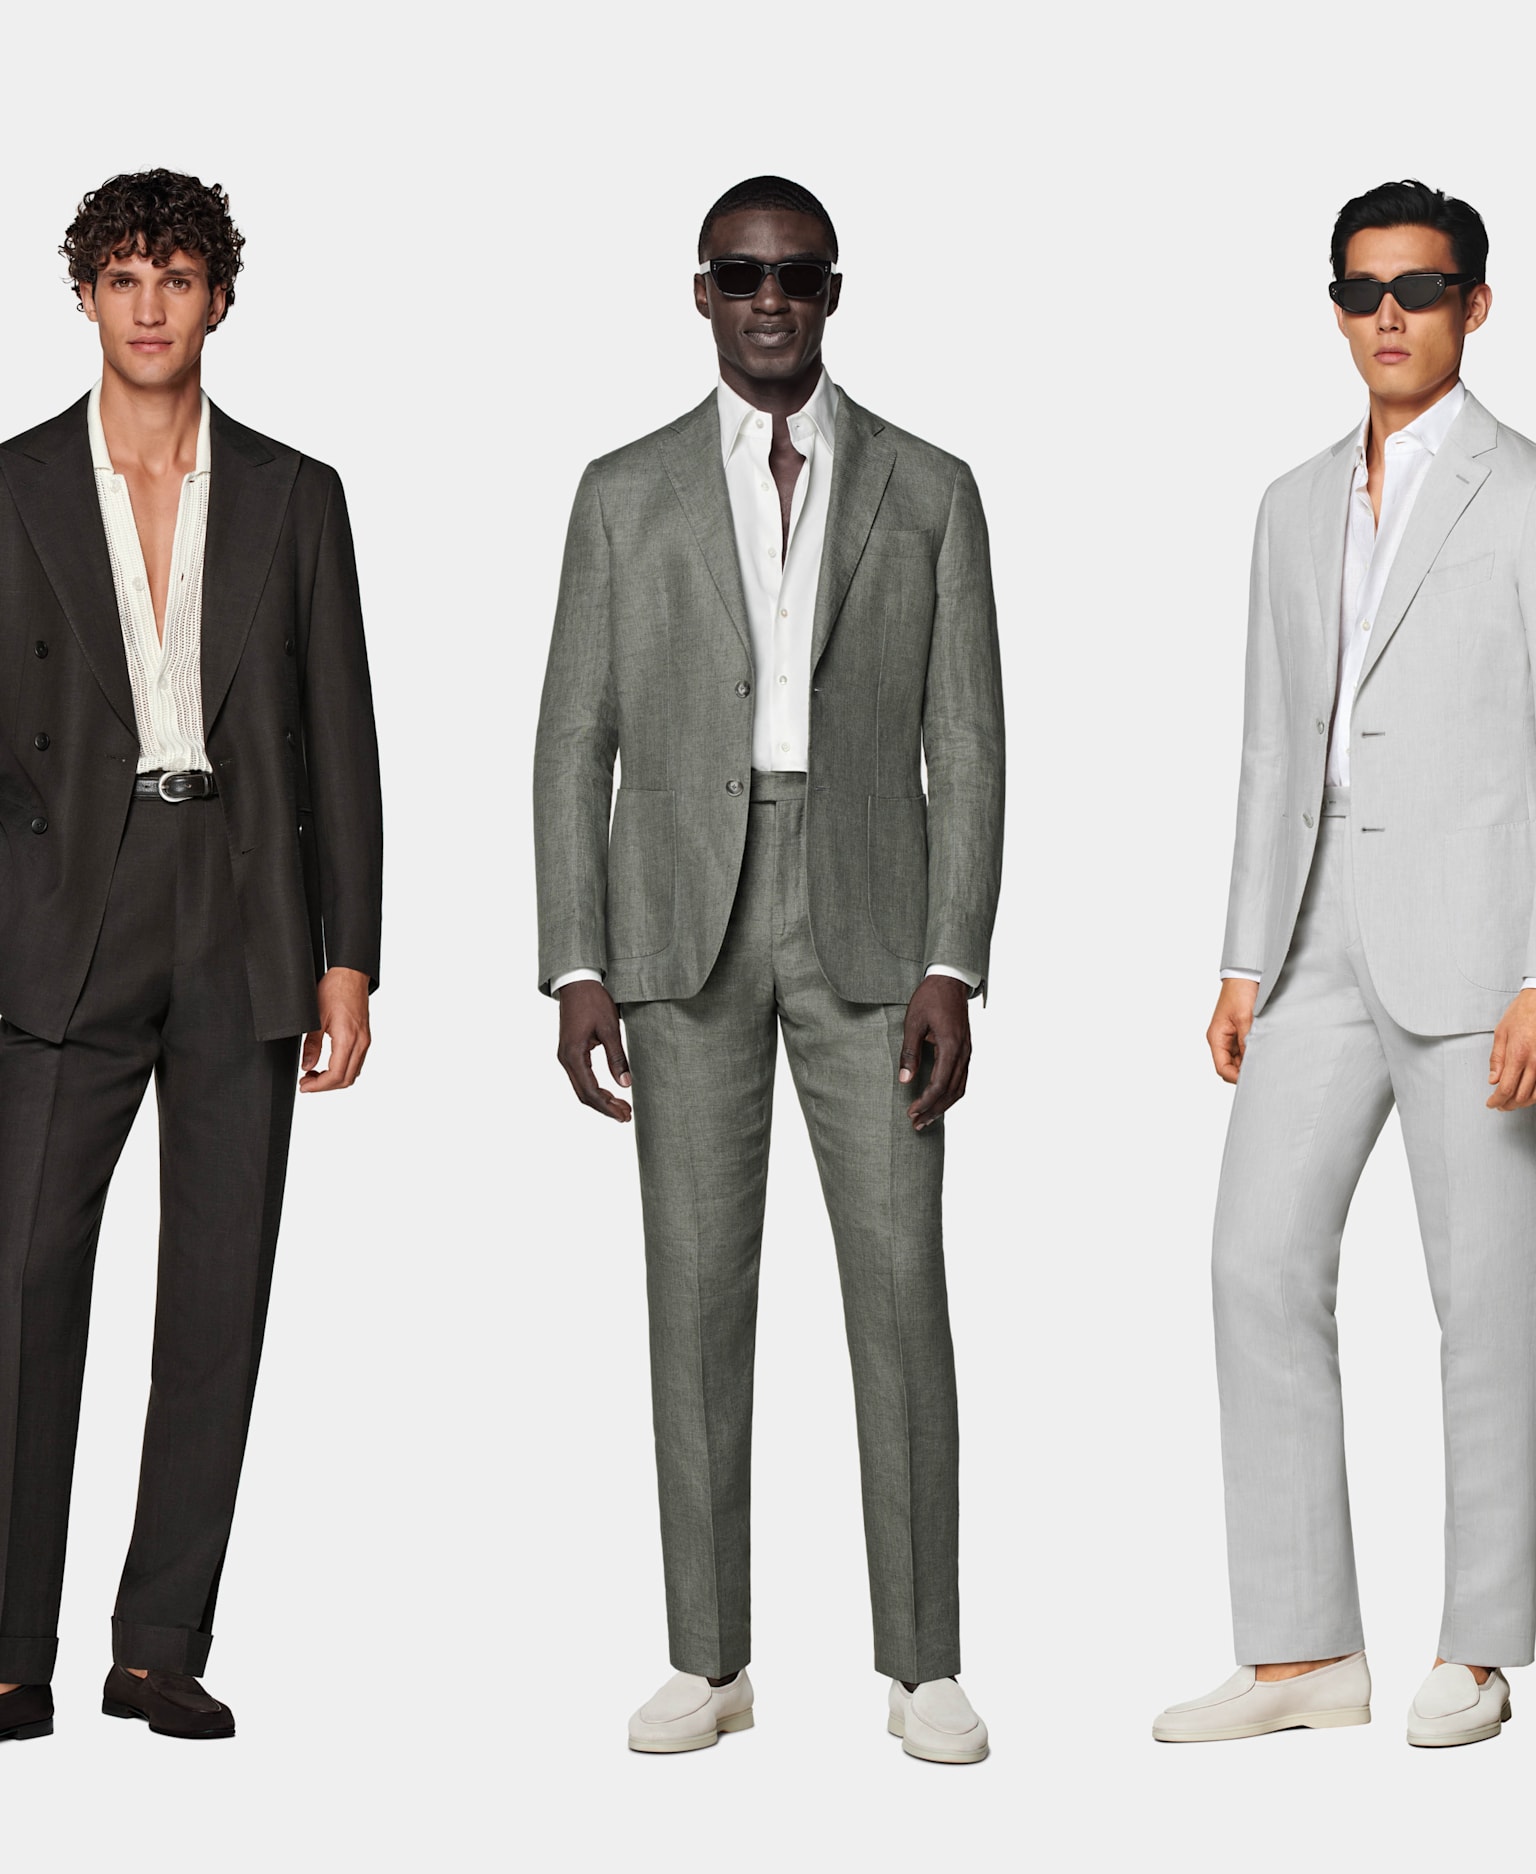 Three relaxed suit and knit styles for men's casual cocktail dress code attire.